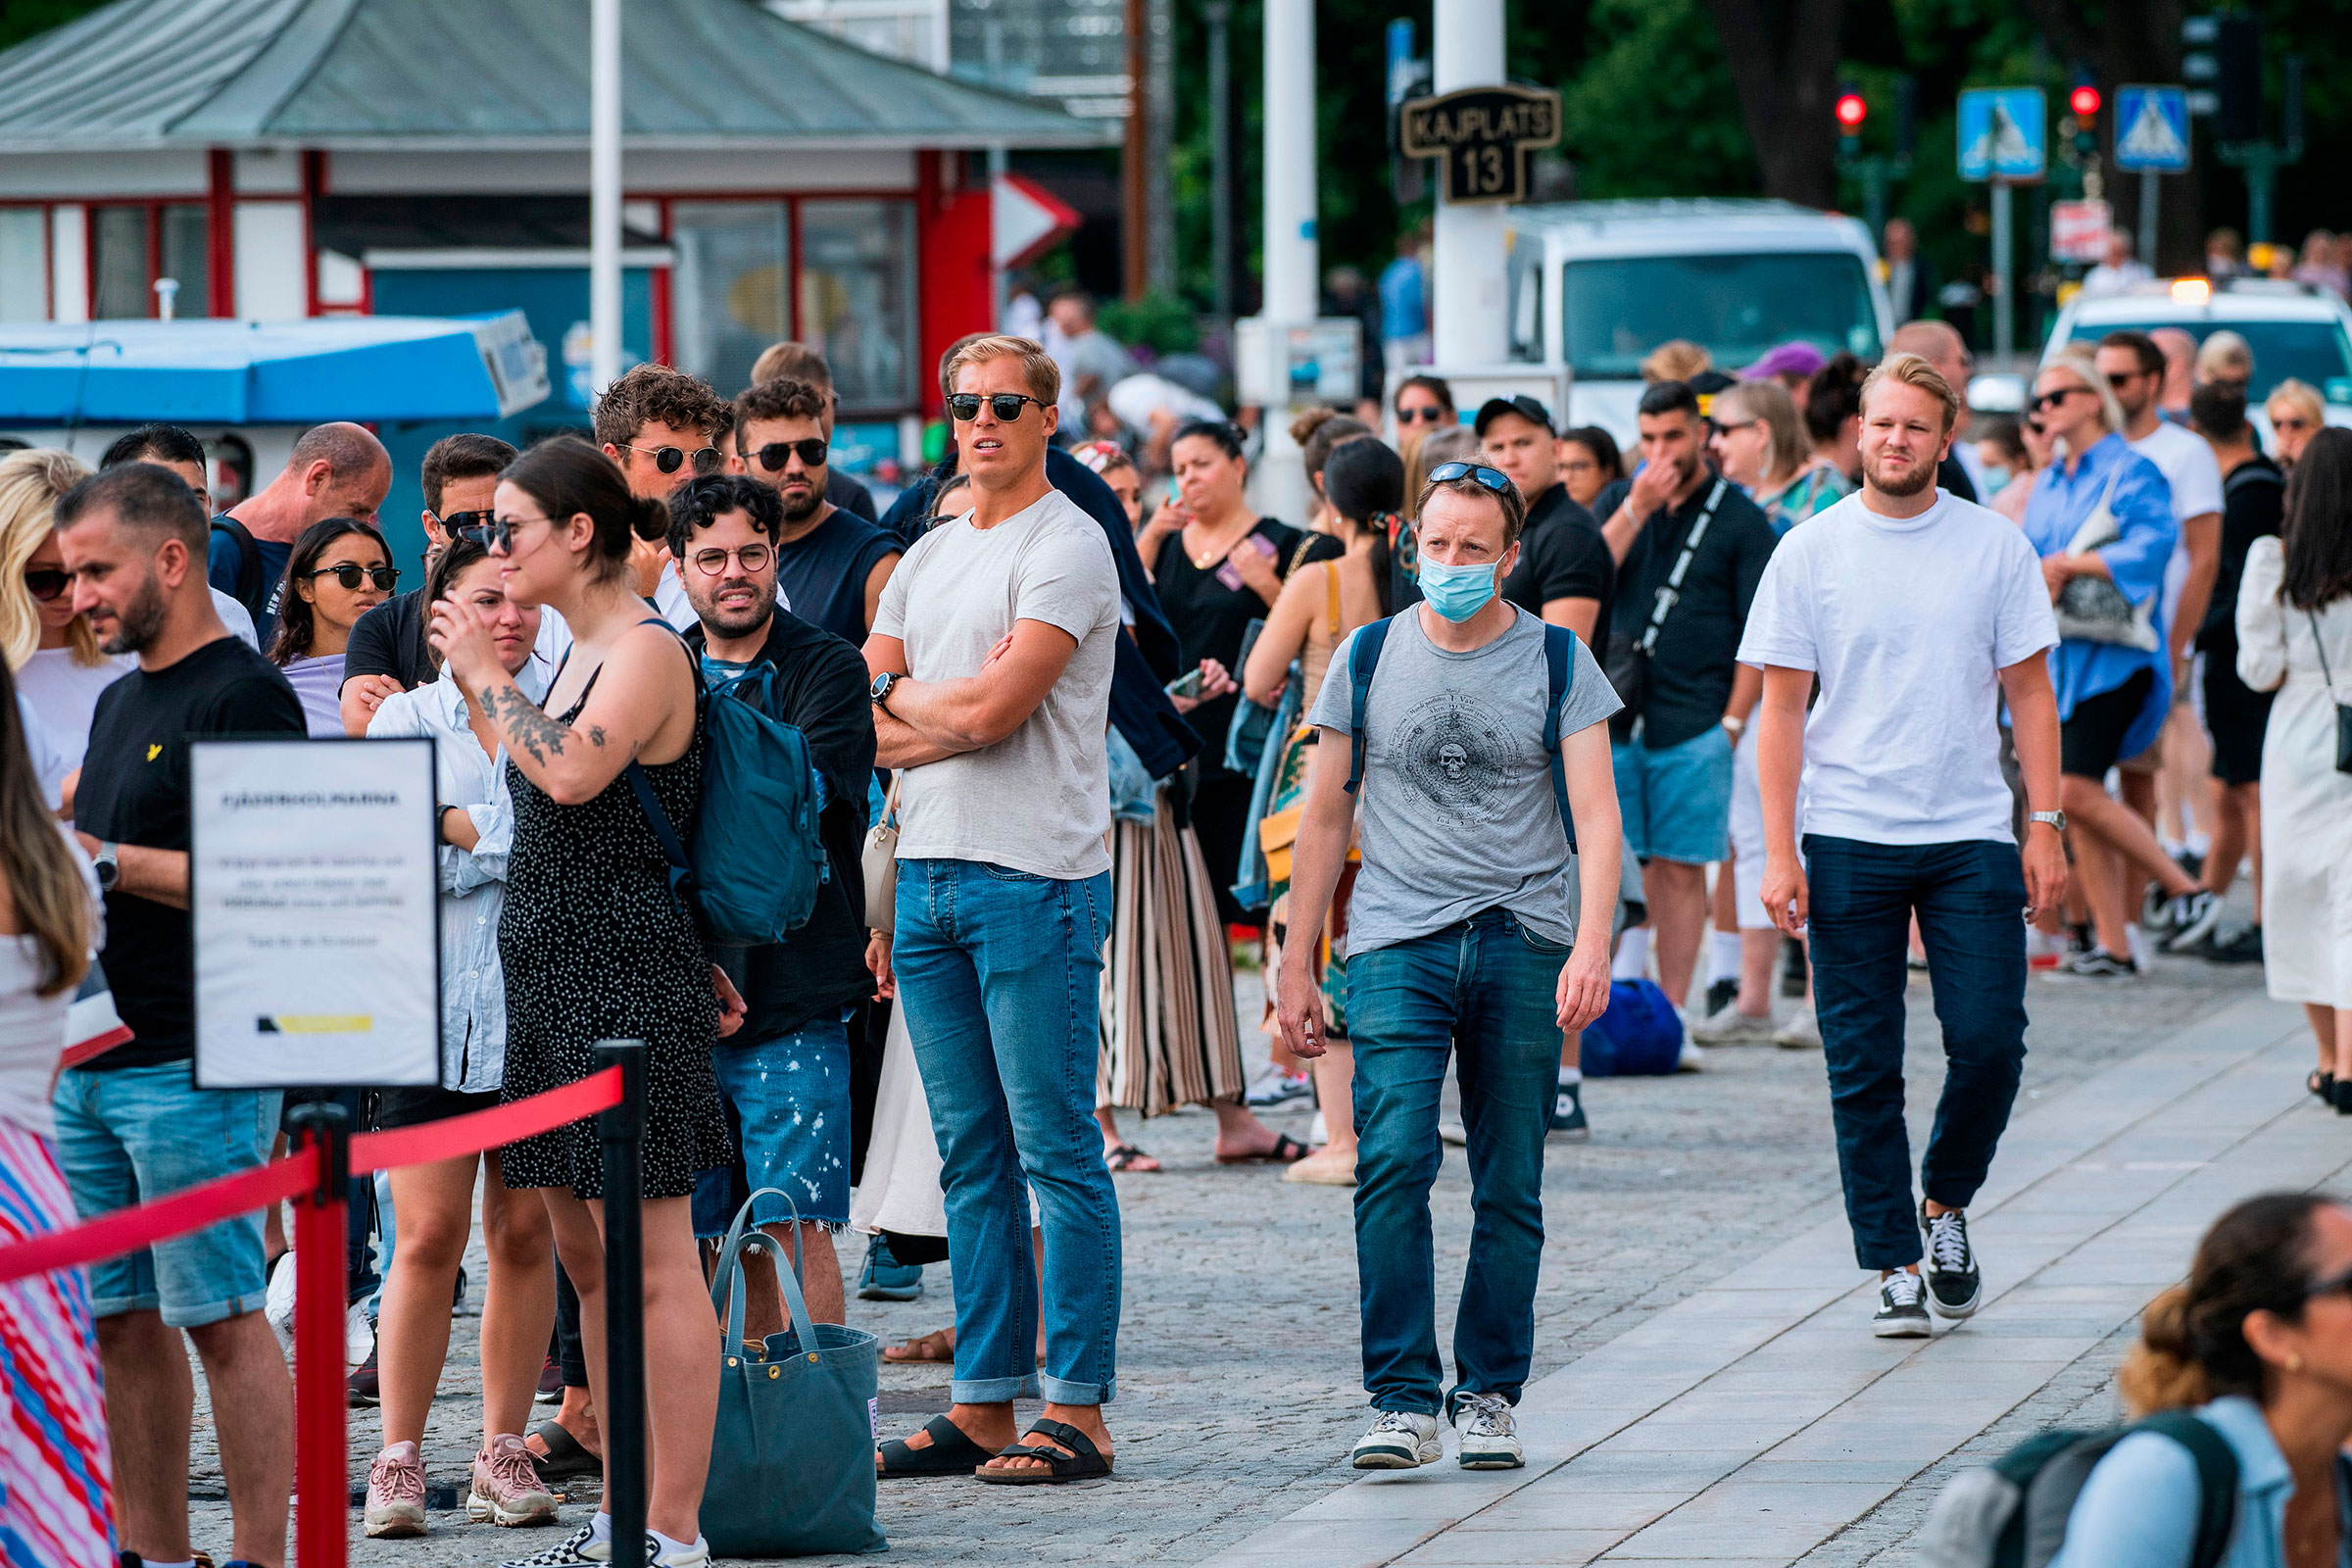 A man wearing a protective mask walks next to travelers as they queue up to board a boat in Stockholm on July 27, 2020. (Jonathan Nackstrand—AFP/Getty Images)